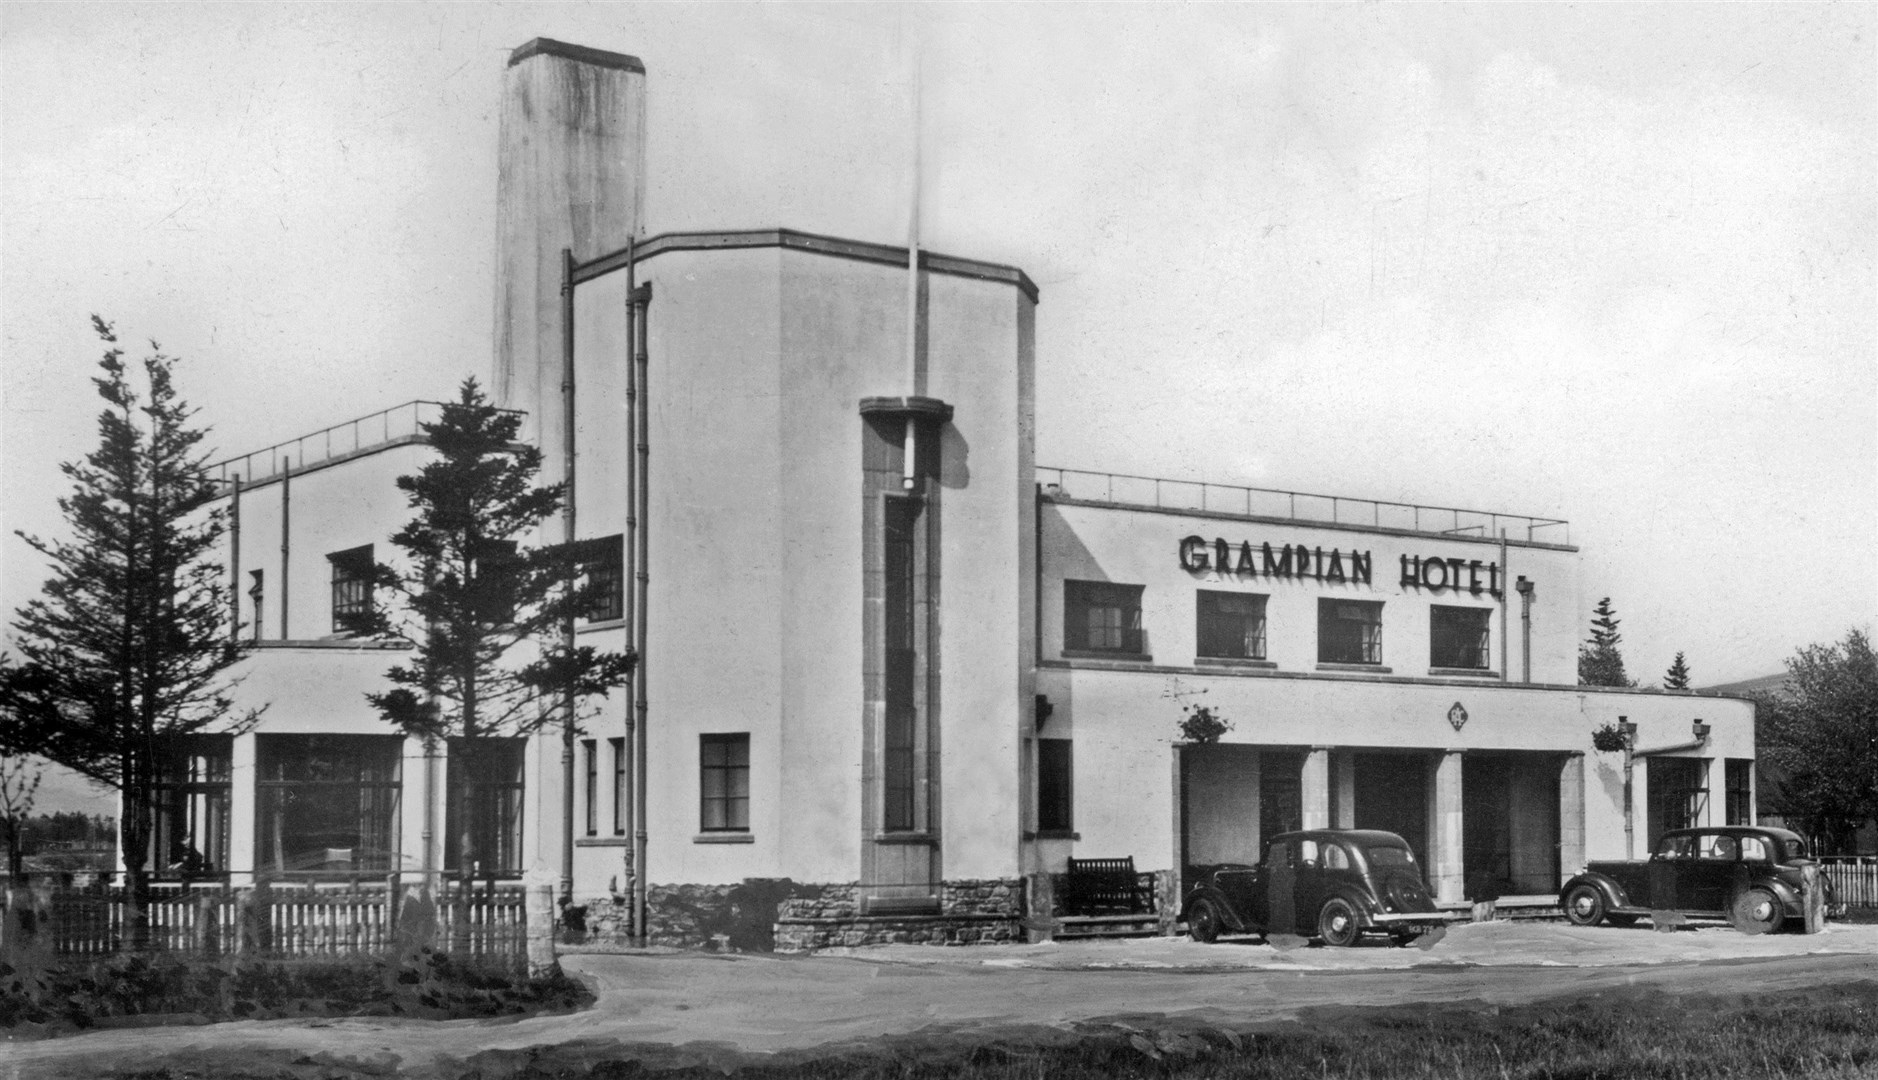 Do you have any details about the Art Deco Grampian Hotel in Dalwhinnie?